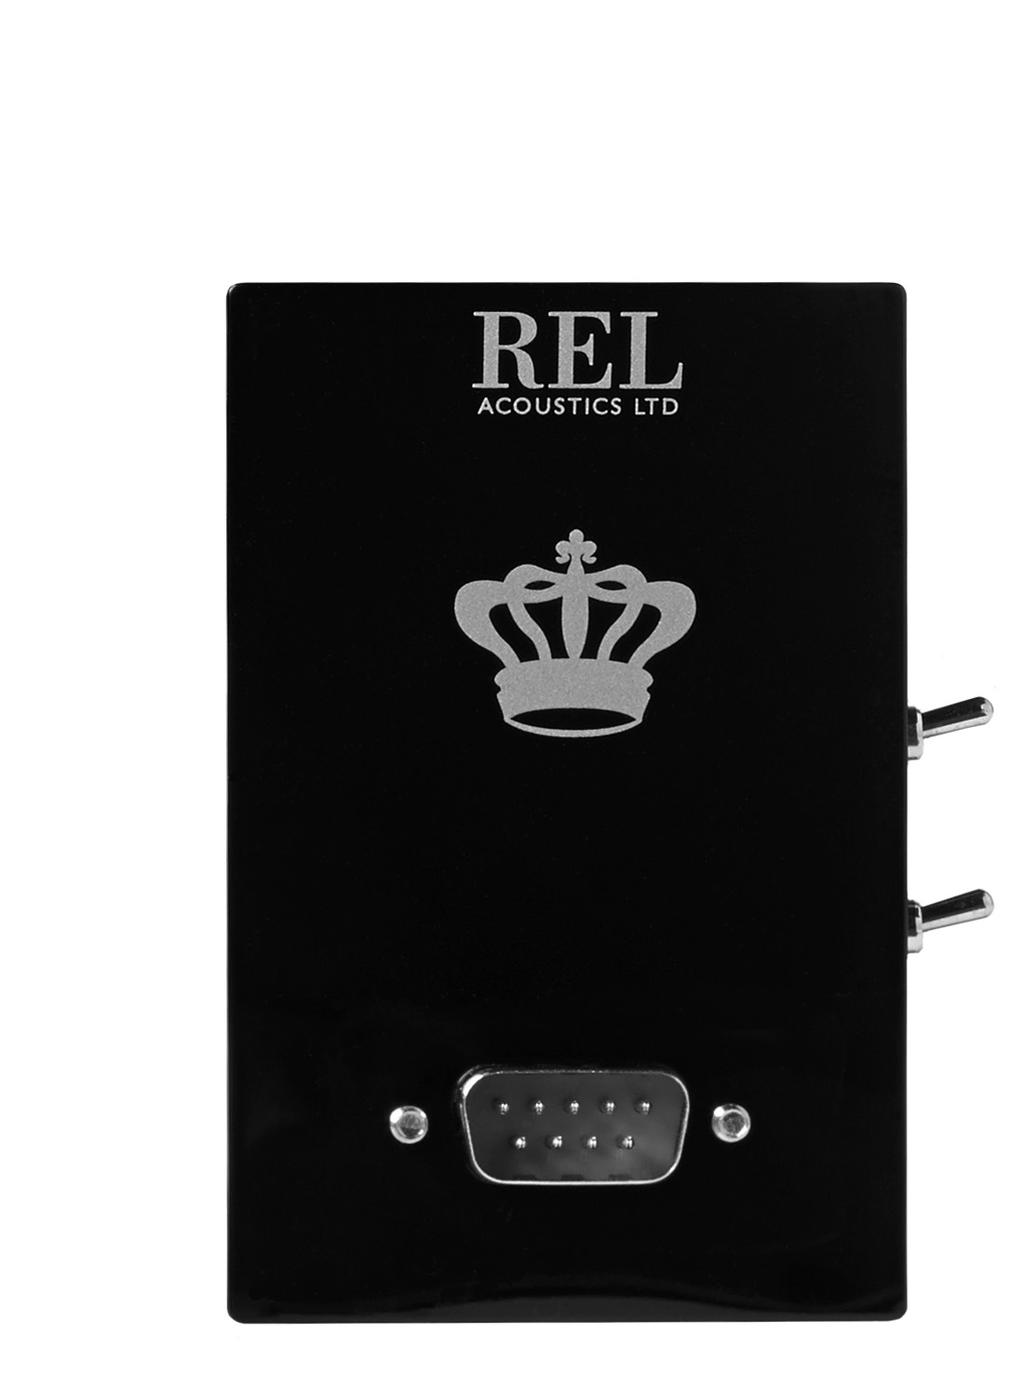 1 2 3 REL Arrow Receiver 1 LED: Indicates whether the REL Arrow receiver is paired with the transmitter or not. 2 Pair Switch: Used to pair REL Arrow receiver with REL cabinet.